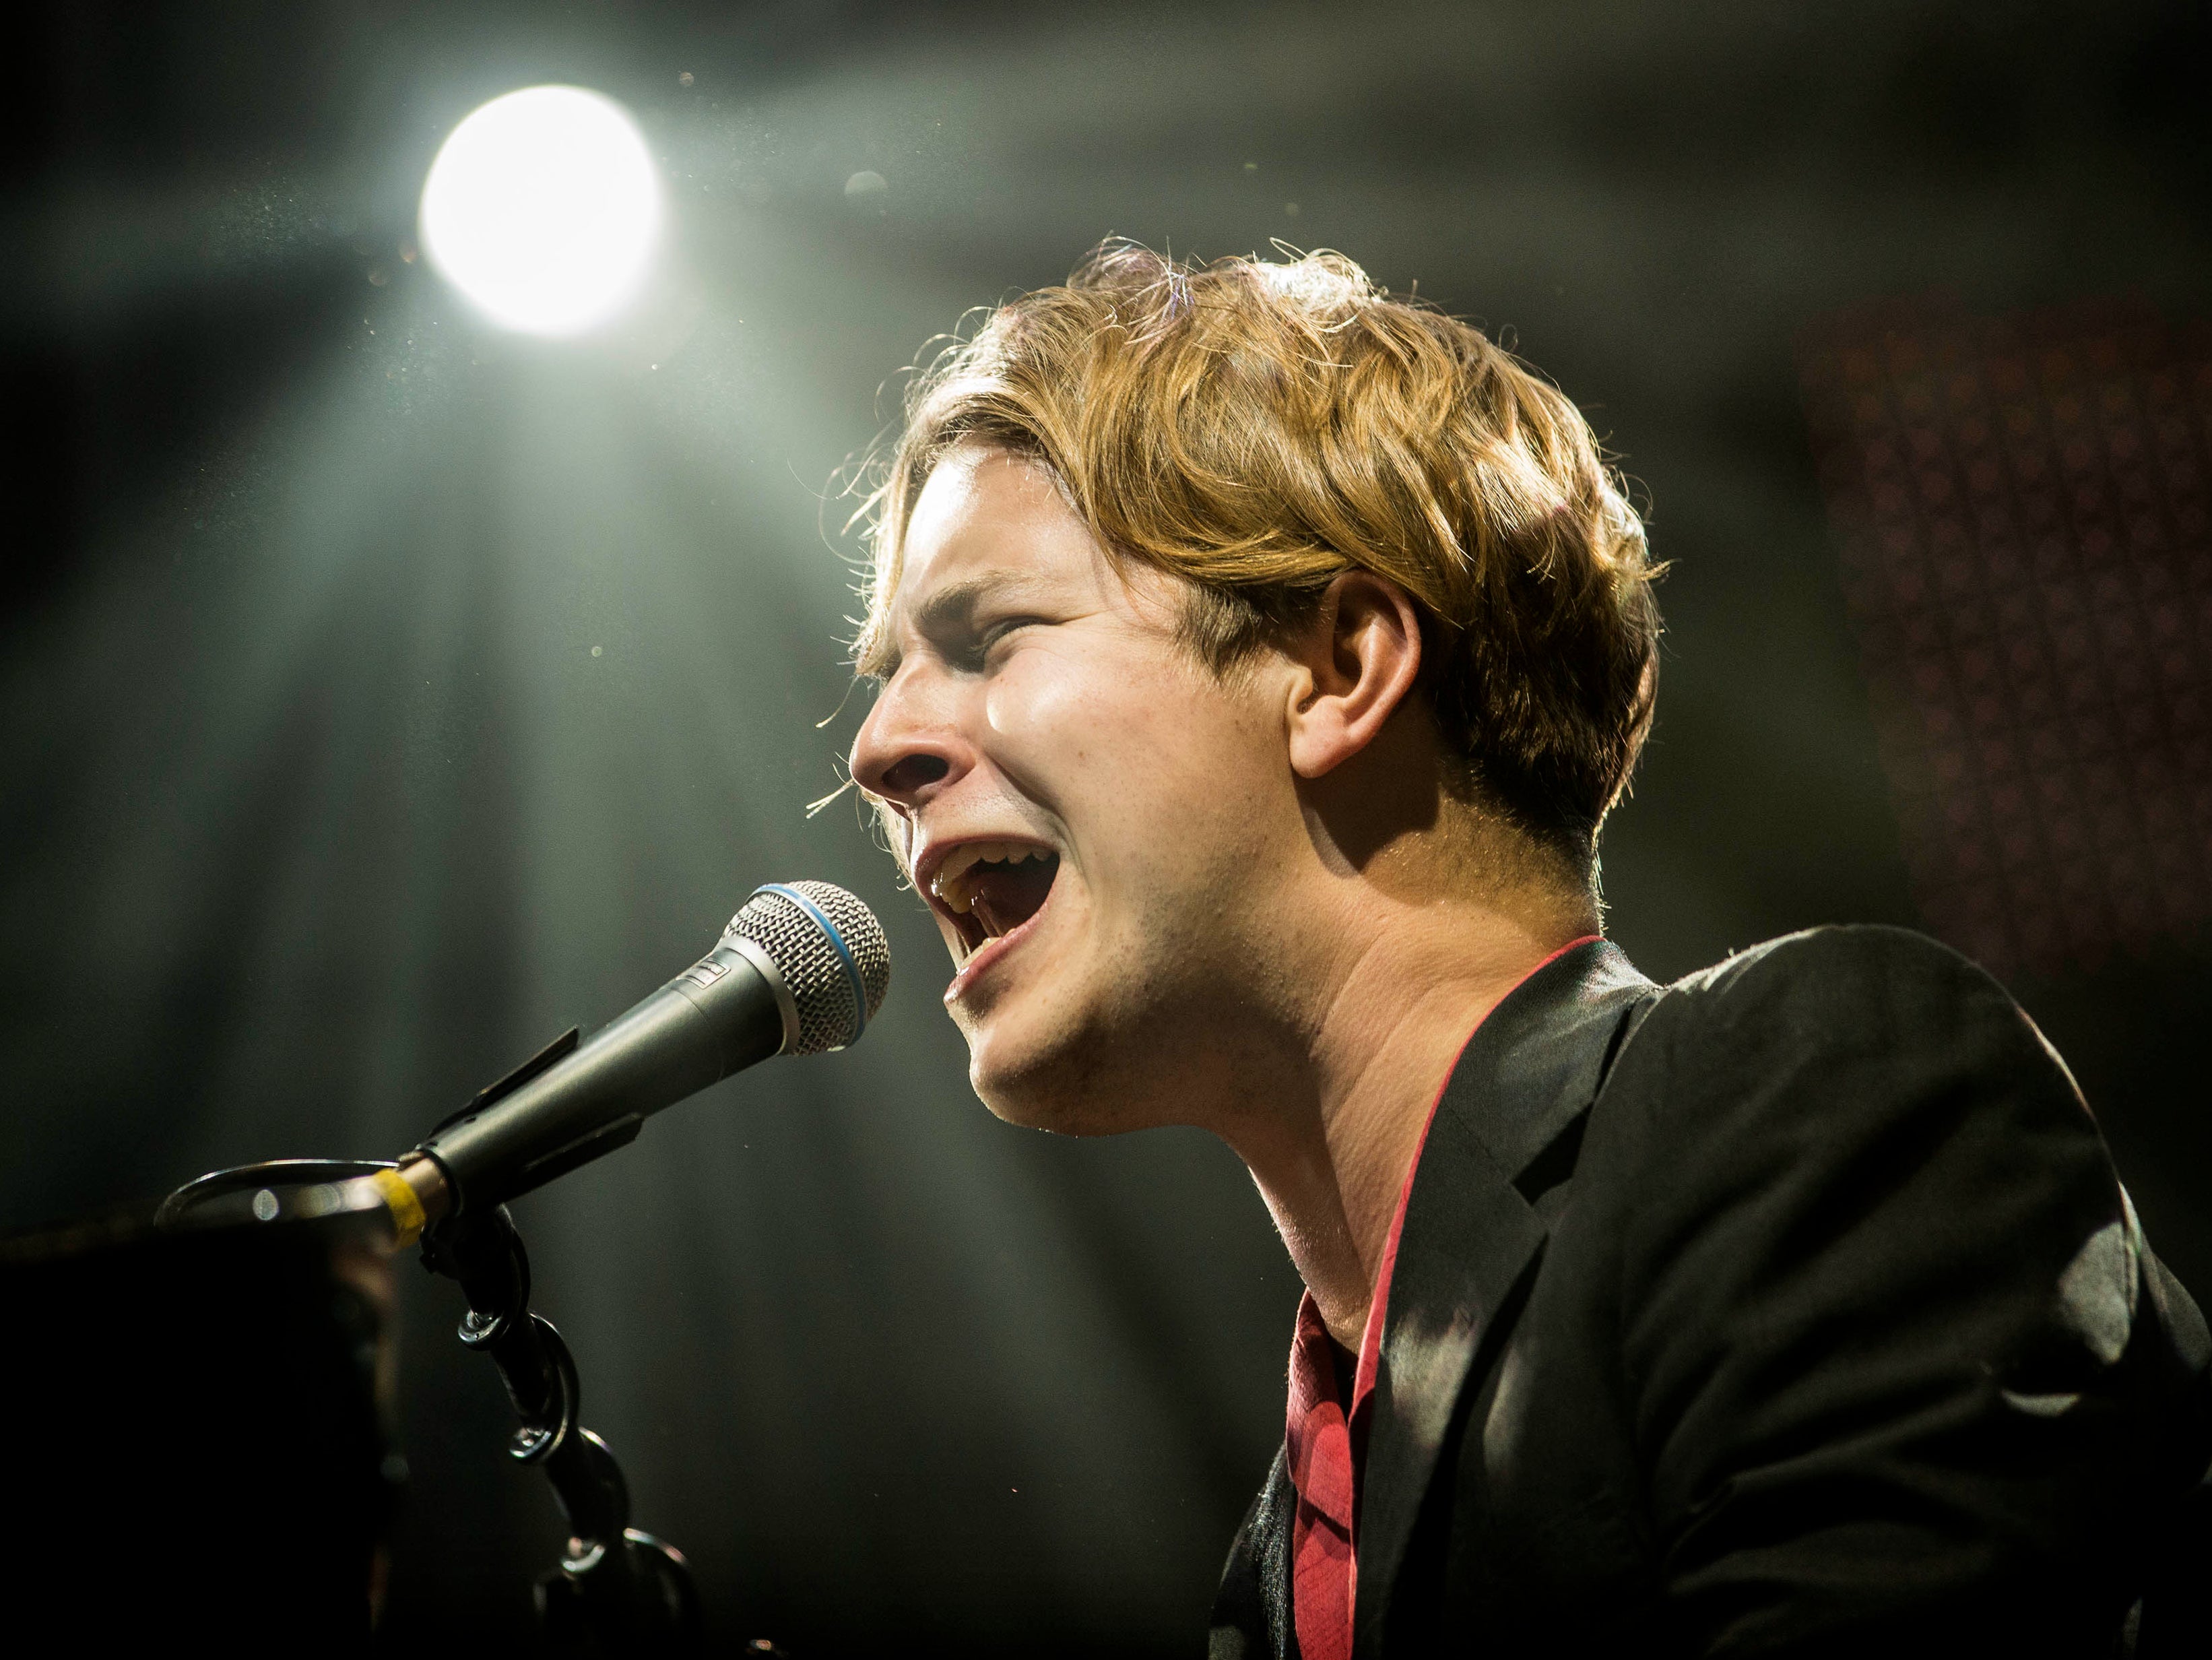 Tom Odell - Another Love (Vevo Presents: Live at Spiegelsaal, Berlin) 